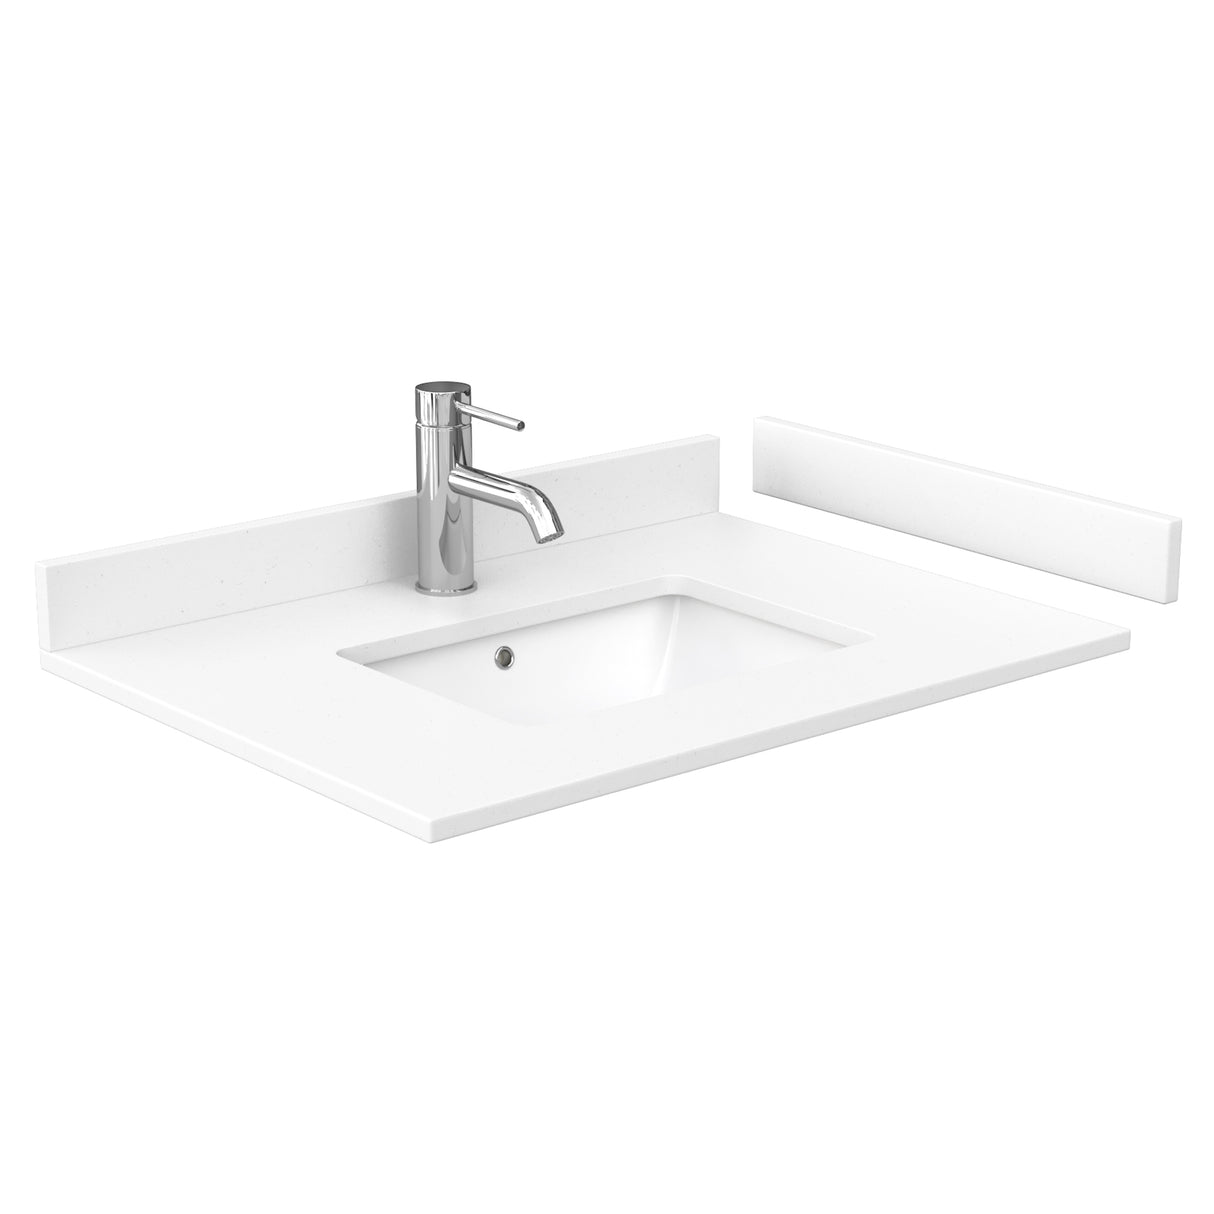 Sheffield 30 Inch Single Bathroom Vanity in White White Cultured Marble Countertop Undermount Square Sink No Mirror